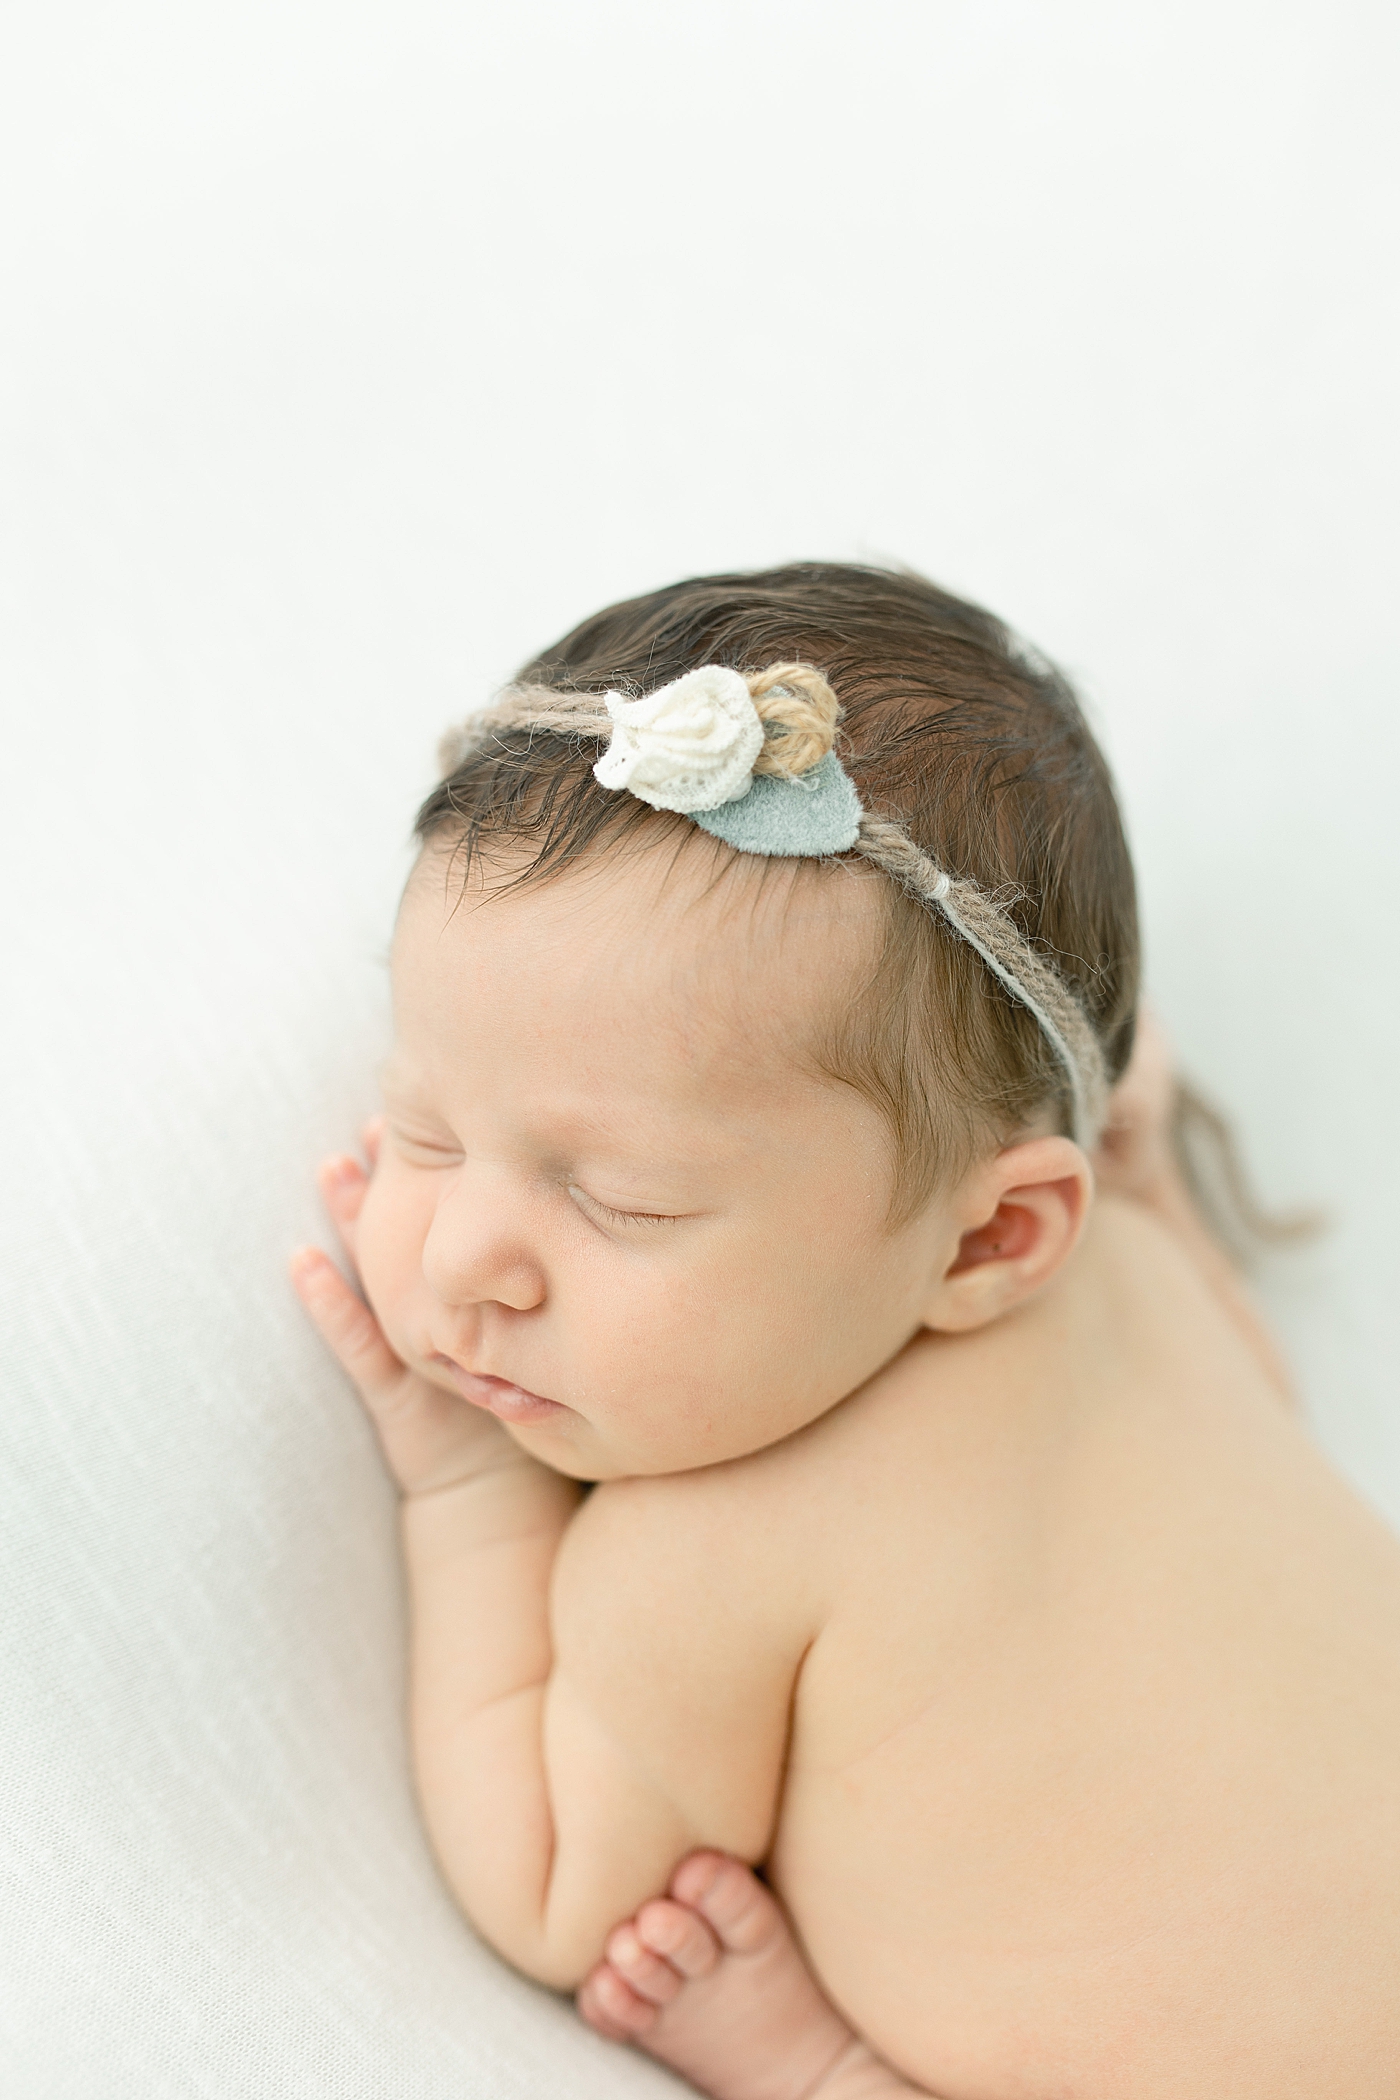 Newborn baby girl with floral headband | Photo by Little Sunshine Photography 